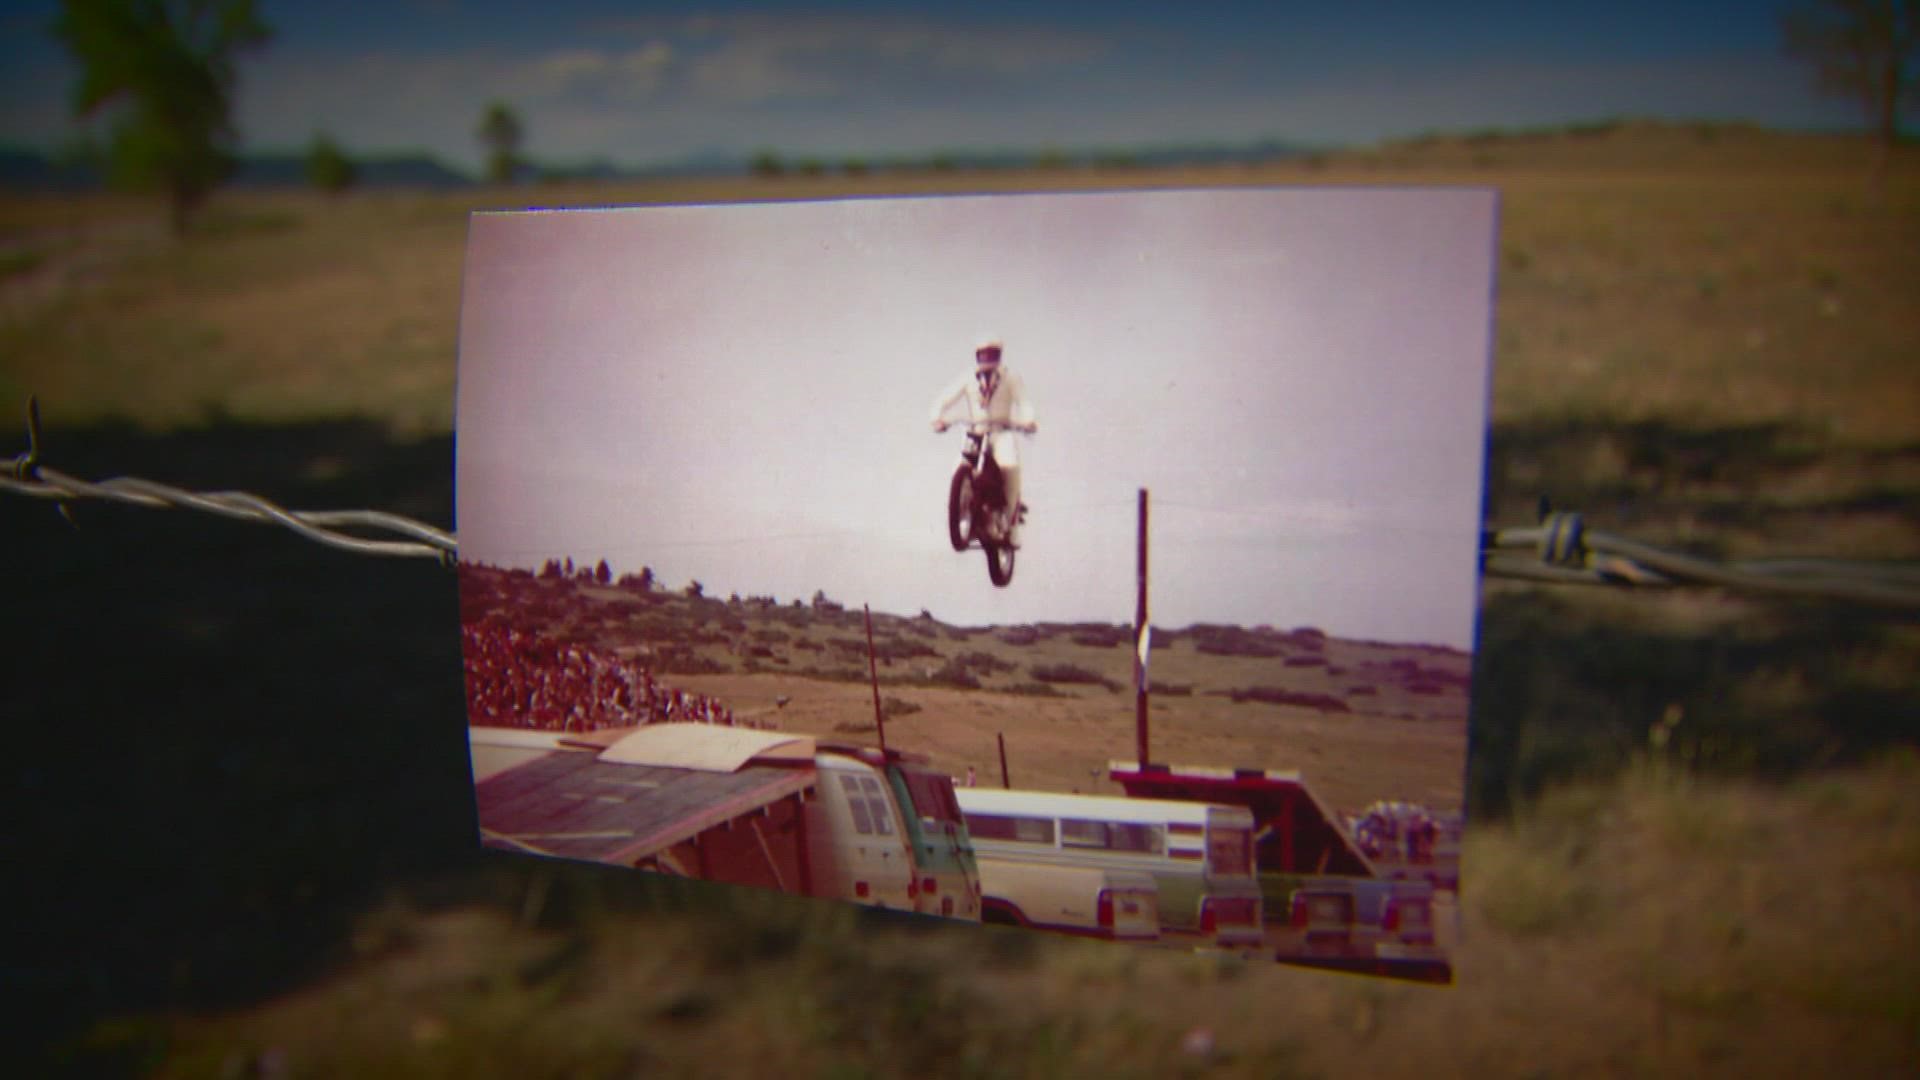 Jim Bensberg was 17 when he photographed one of the daredevil showman's 300 motorcycle jumps in what's now an empty field next to I-25.